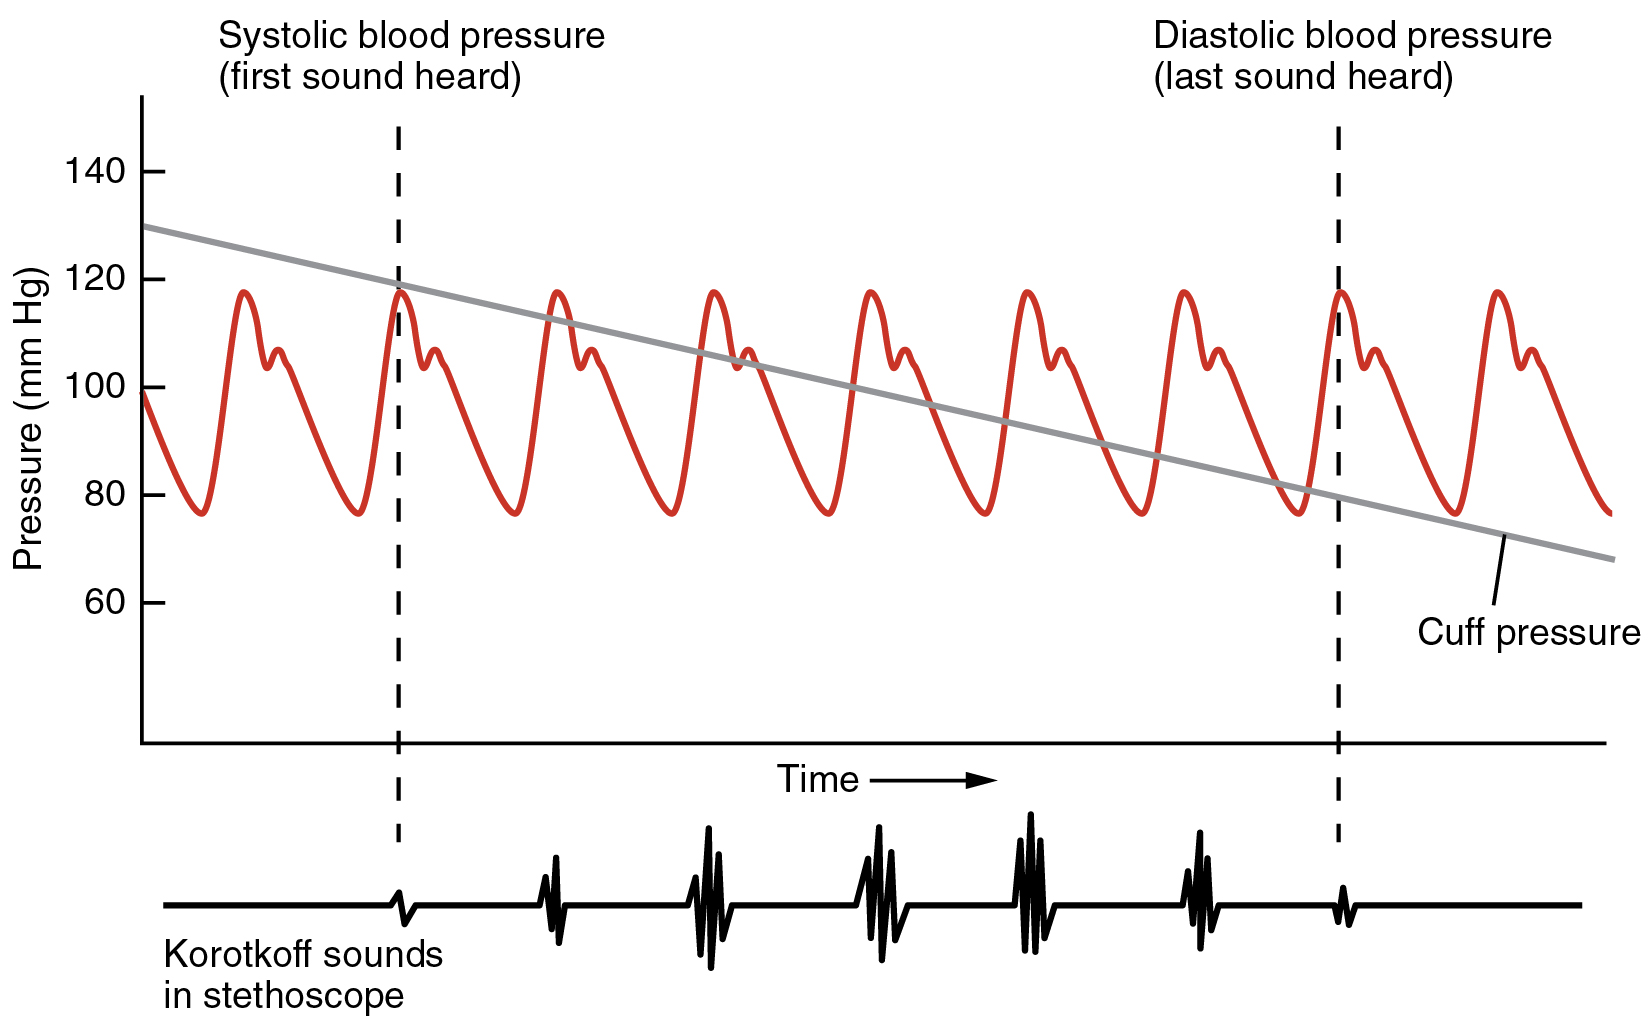 This image shows blood pressure (y-axis) vs time (x-axis)  On the bottom is a sonogram which represents the korotkoff sounds heard from a stethoscope during blood pressure measurement.  The blood pressure is a red oscillating peak wave that consistently cycles between 120 & 80.  A slow decreasing line from 130 descend across the graph to 80 as this represents the blood pressure cuff pressure.